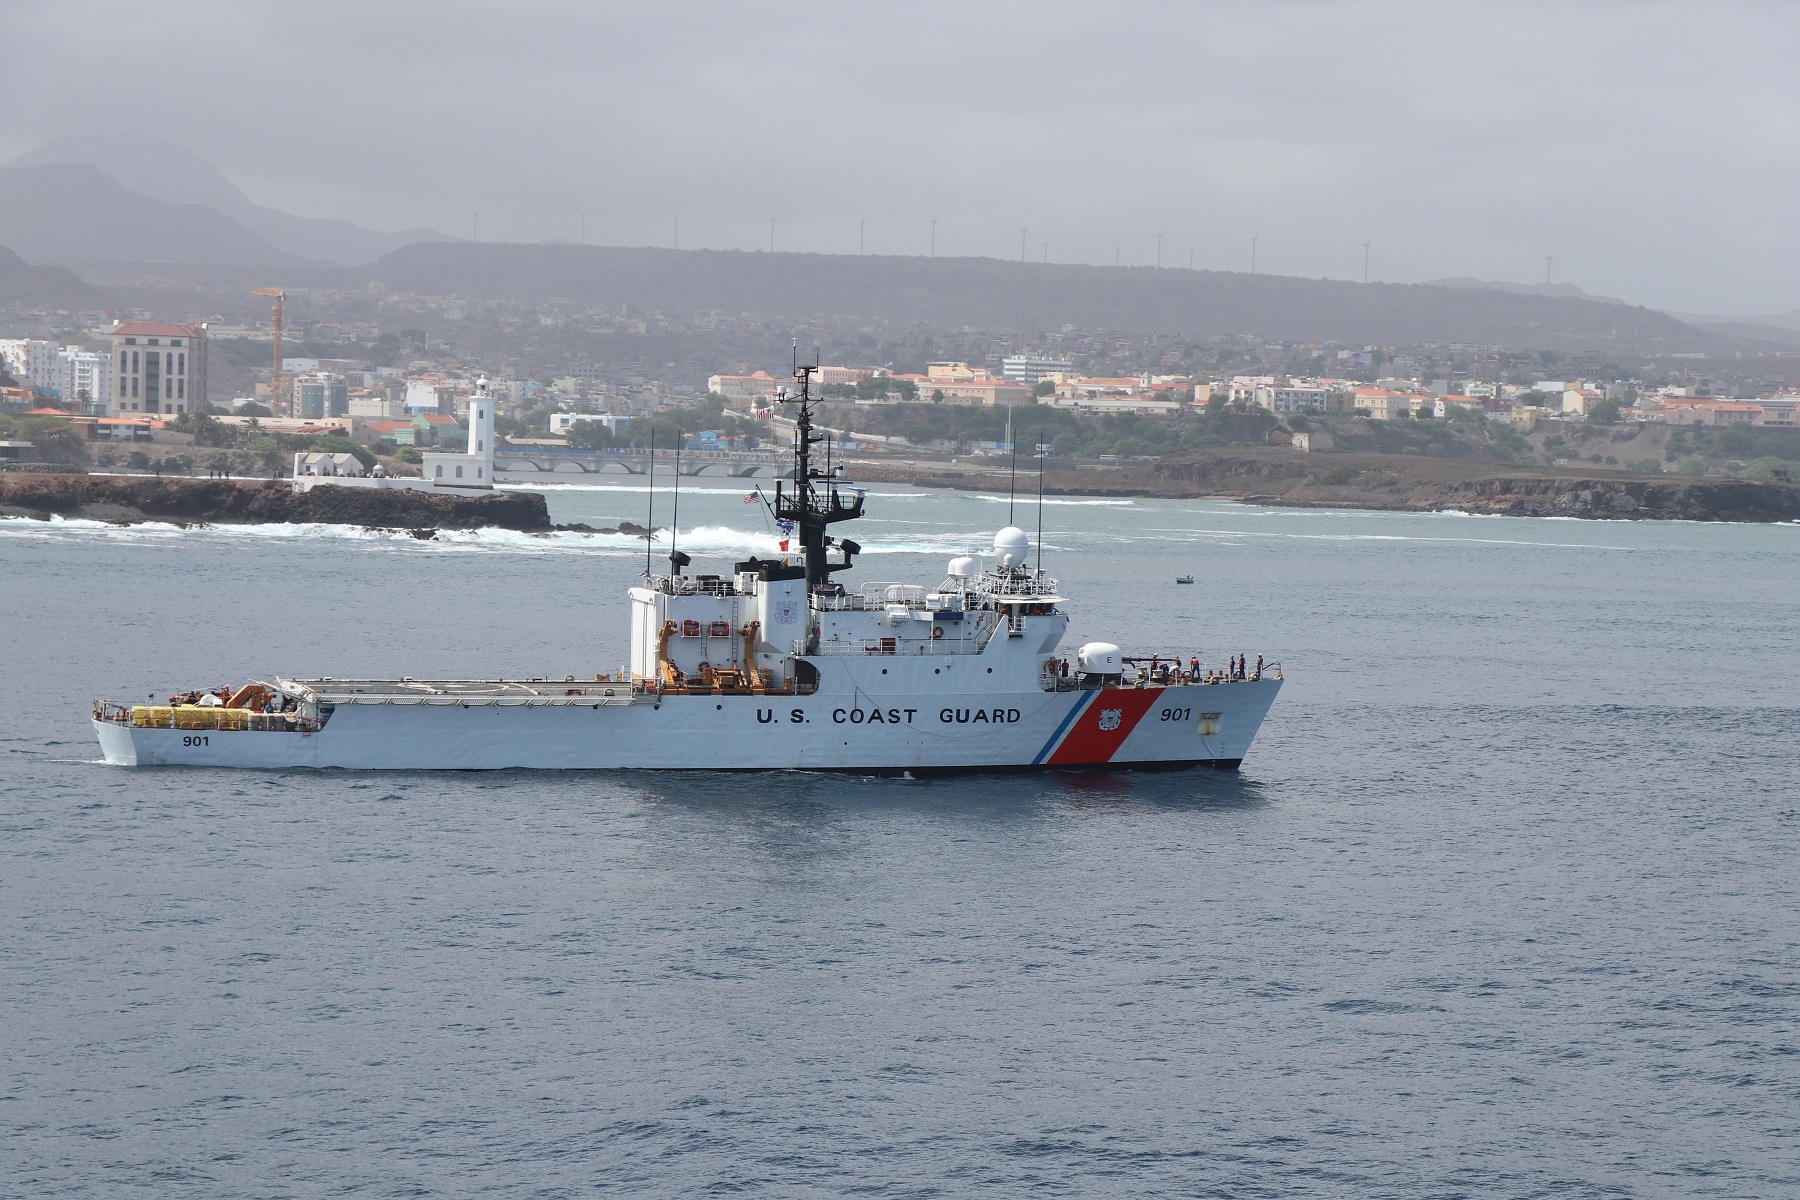 CGC BEAR off the coast of Praia, during the crew's most recent deployment to Africa.